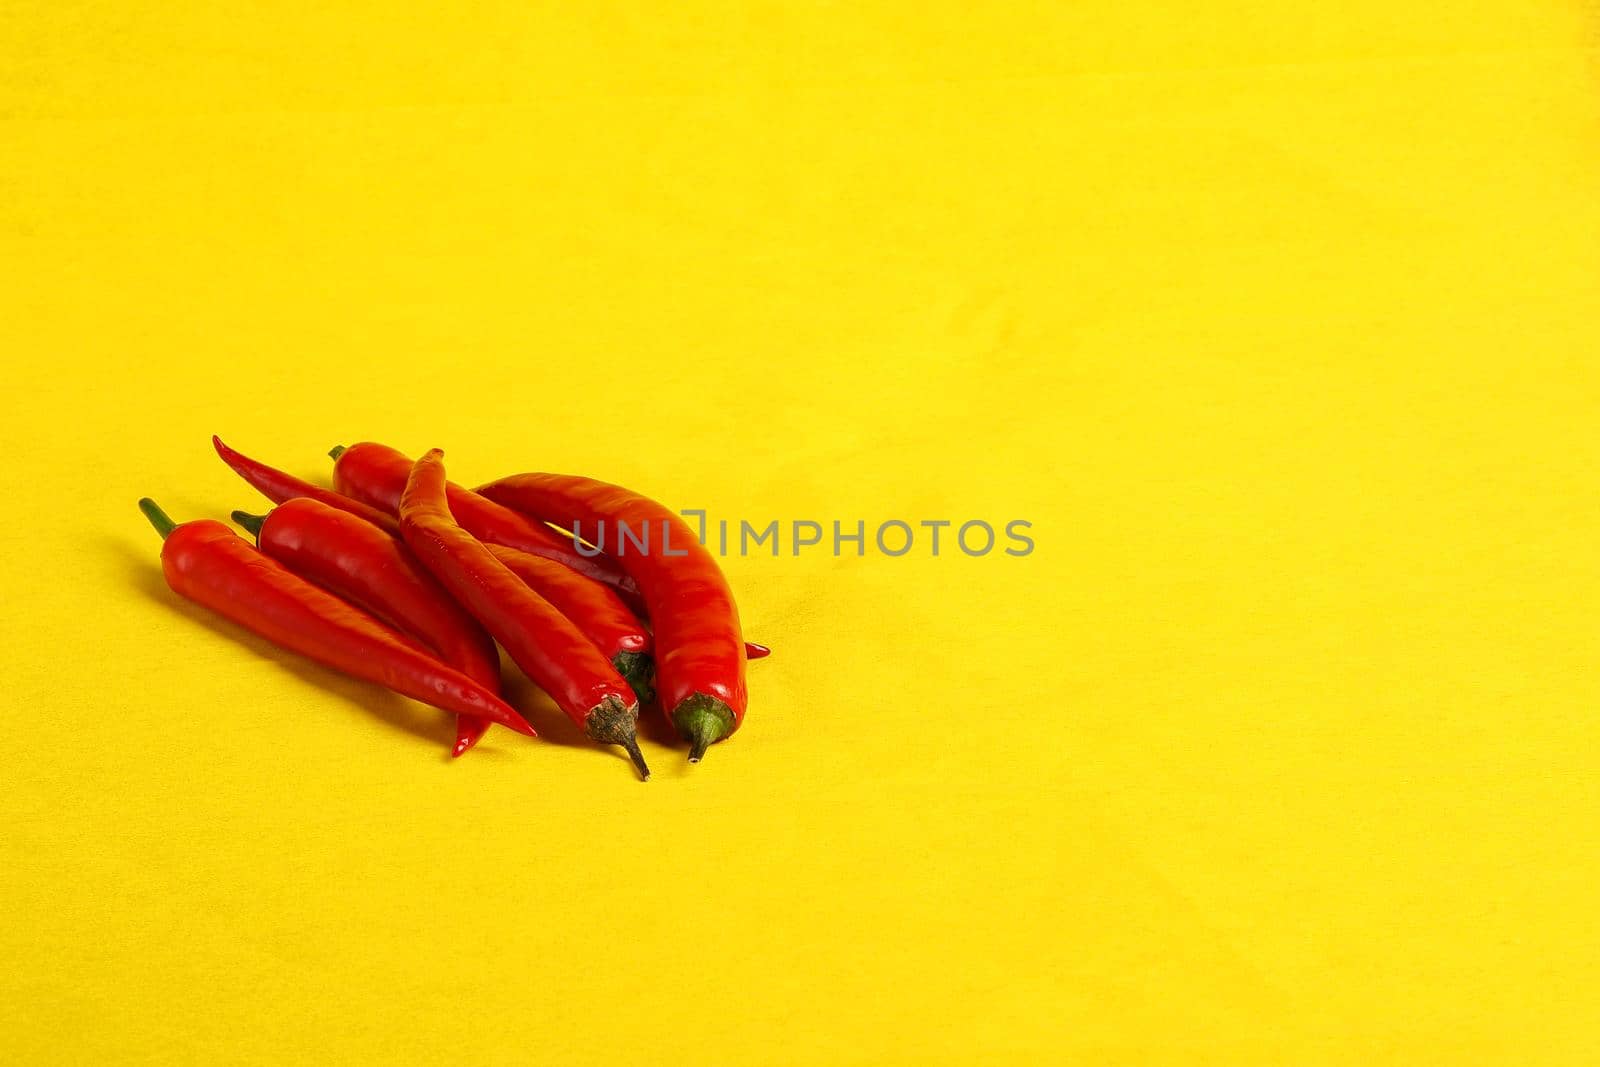 Red pepper pod on a yellow background close-up, isolated, with a place for inscription. High quality photo